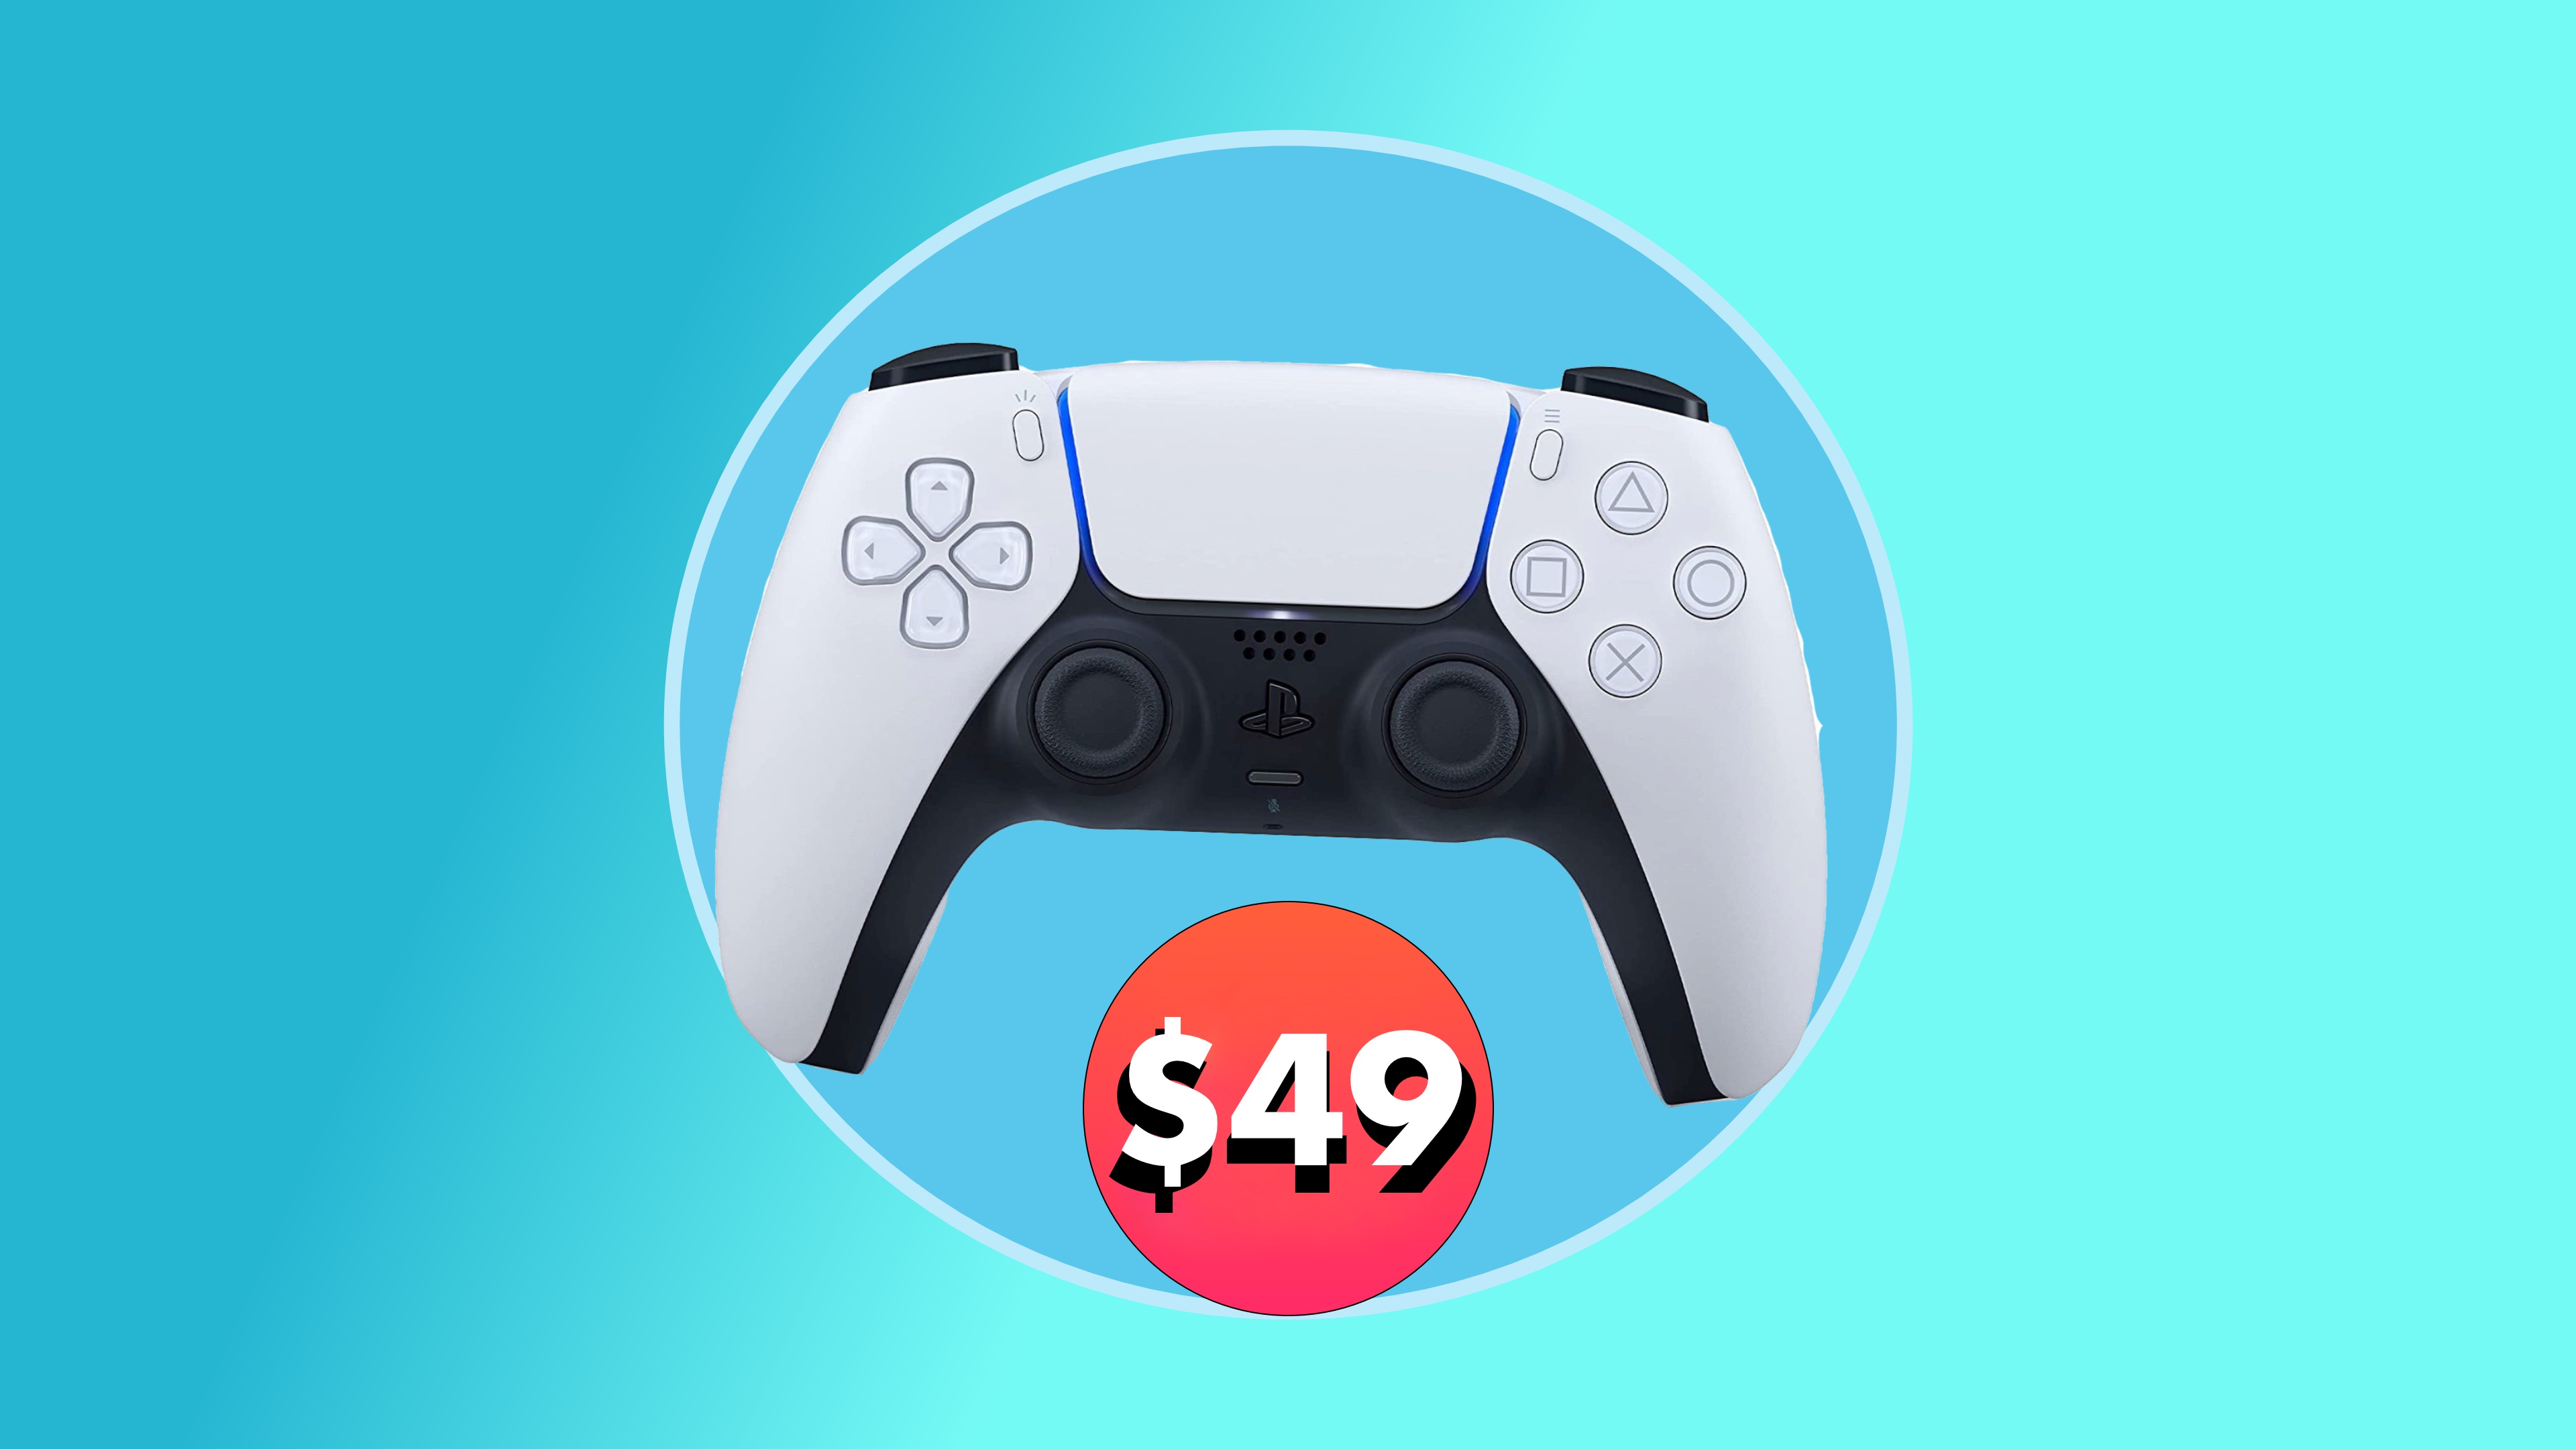 Take your iOS gaming to the next level with this 30% discount on the PlayStation DualSense controller